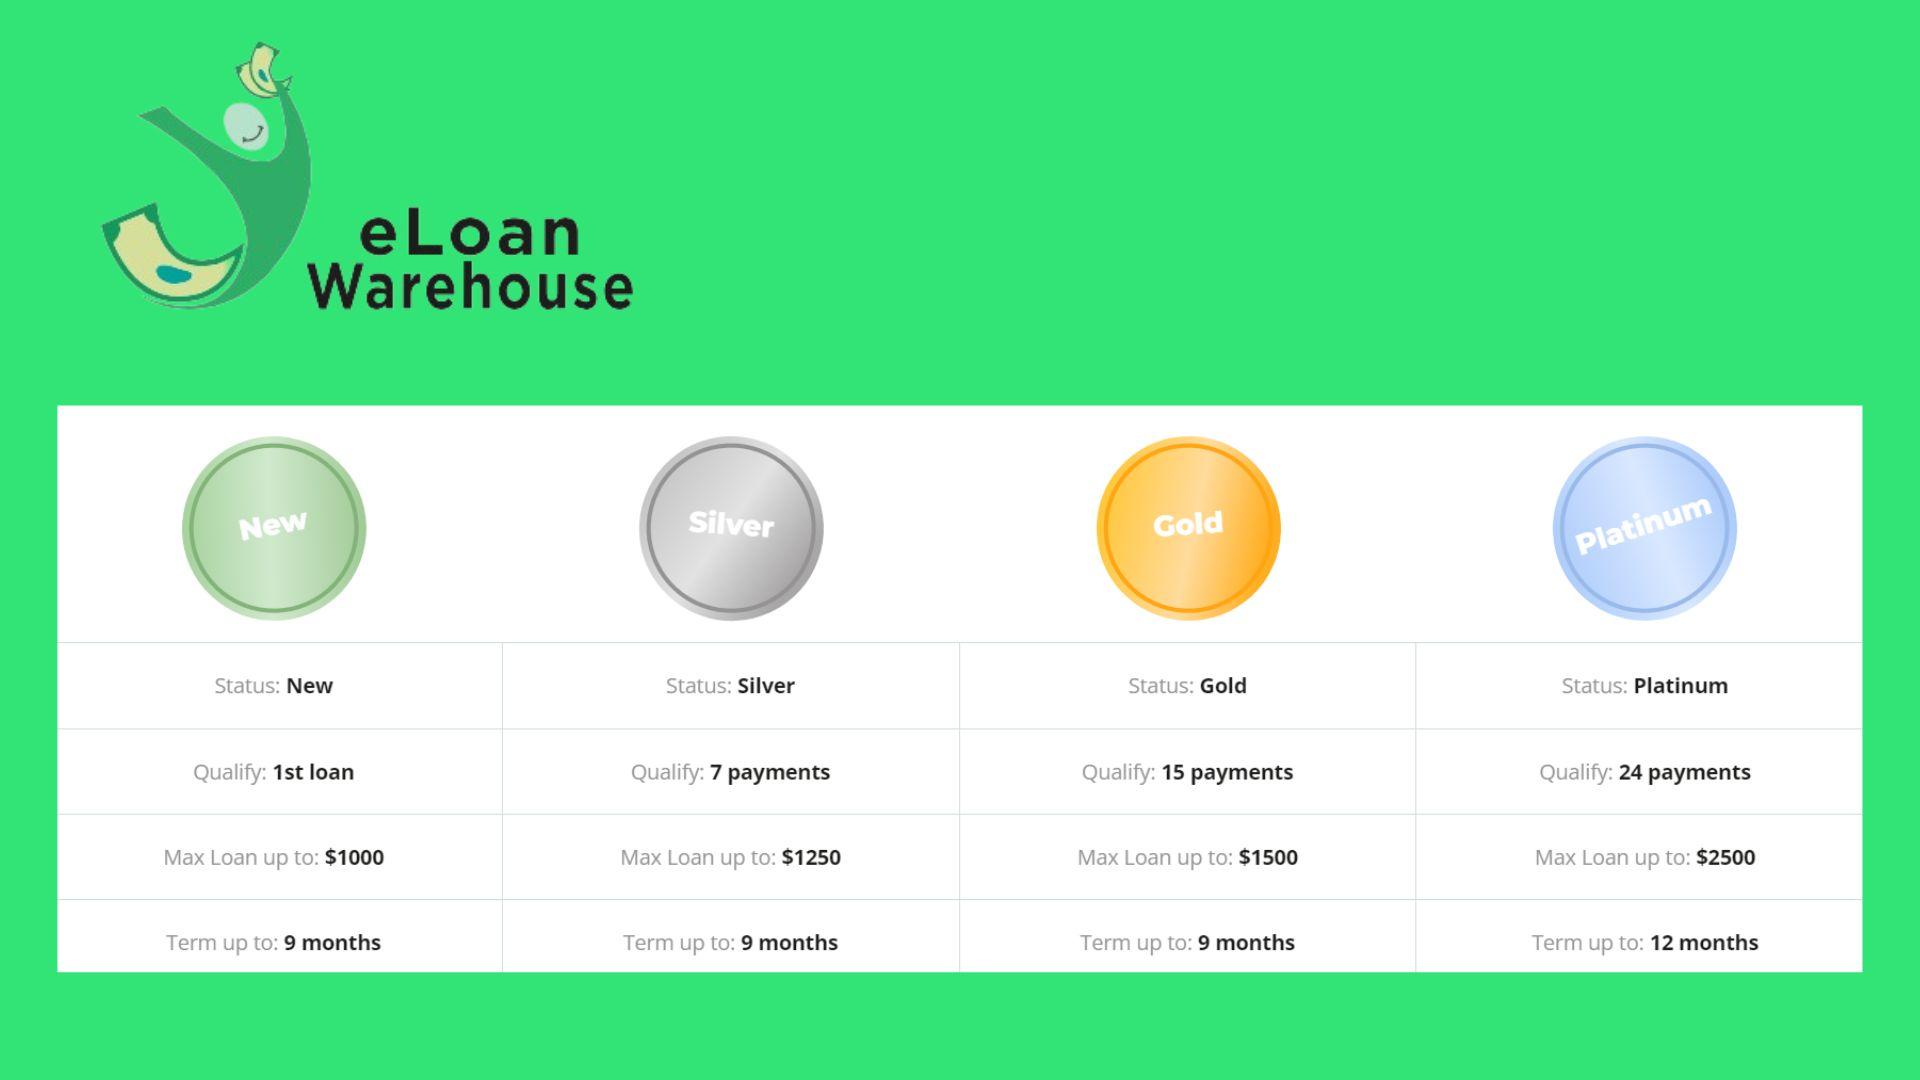 What will my Loan cost on eLoanWarehouse?